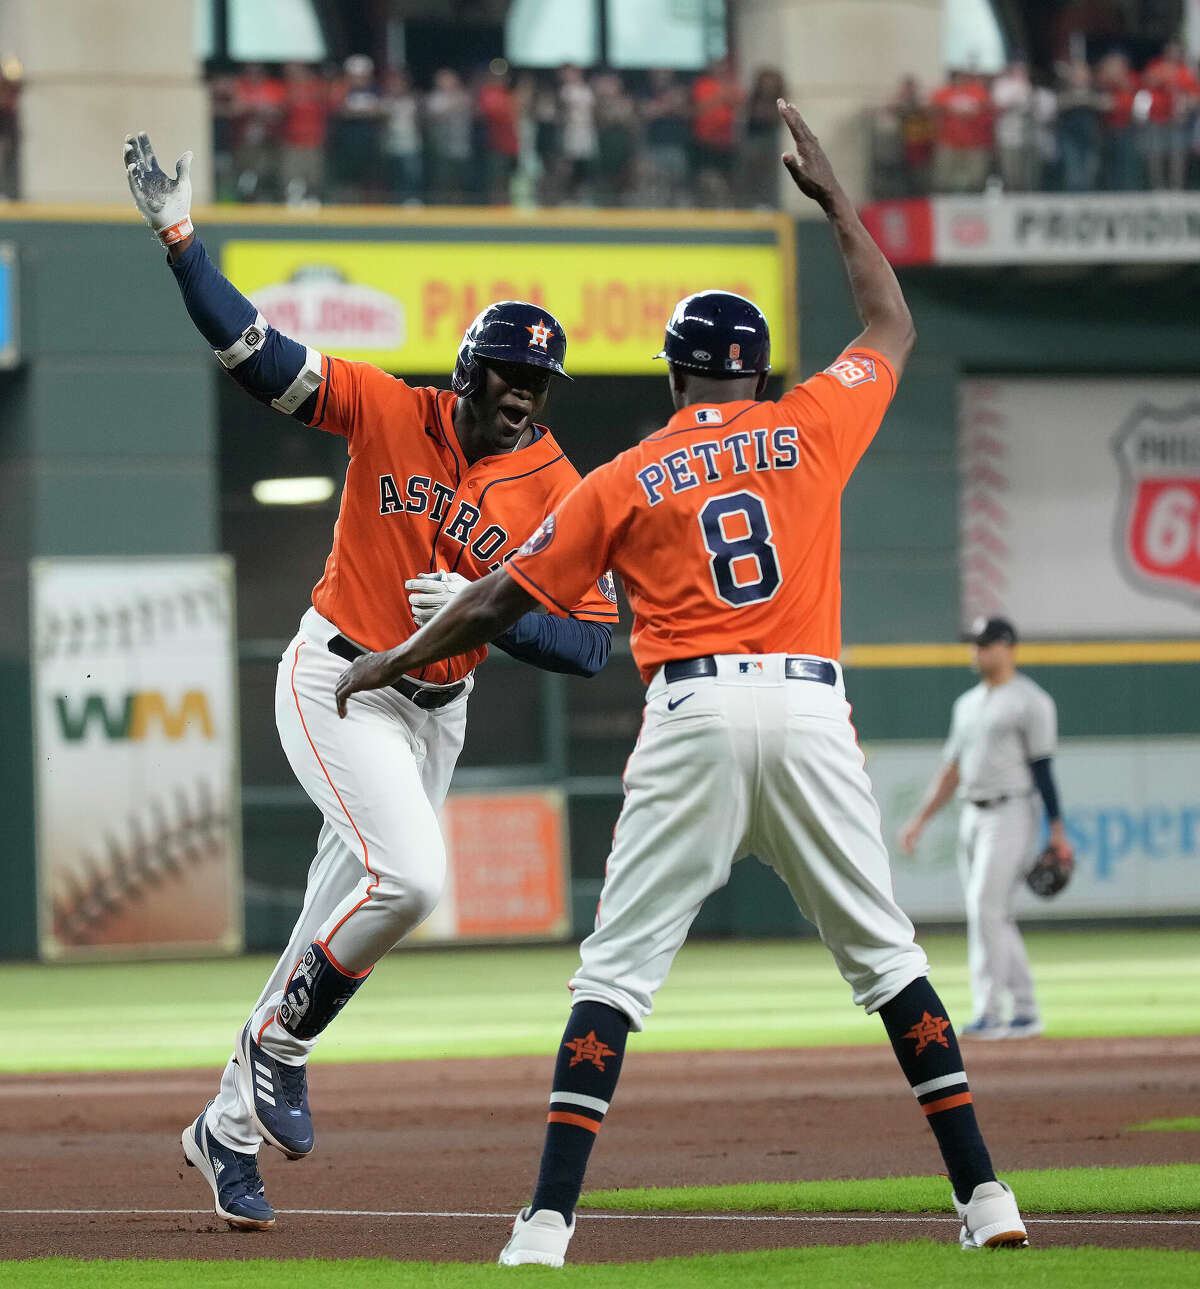 Houston Astros designated hitter Yordan Alvarez (44) celebrates with third base coach Gary Pettis (8) after hitting a home run off of New York Yankees starting pitcher Domingo German during the first inning of Game two of a doublehead MLB baseball game at Minute Maid Park on Thursday, July 21, 2022 in Houston.